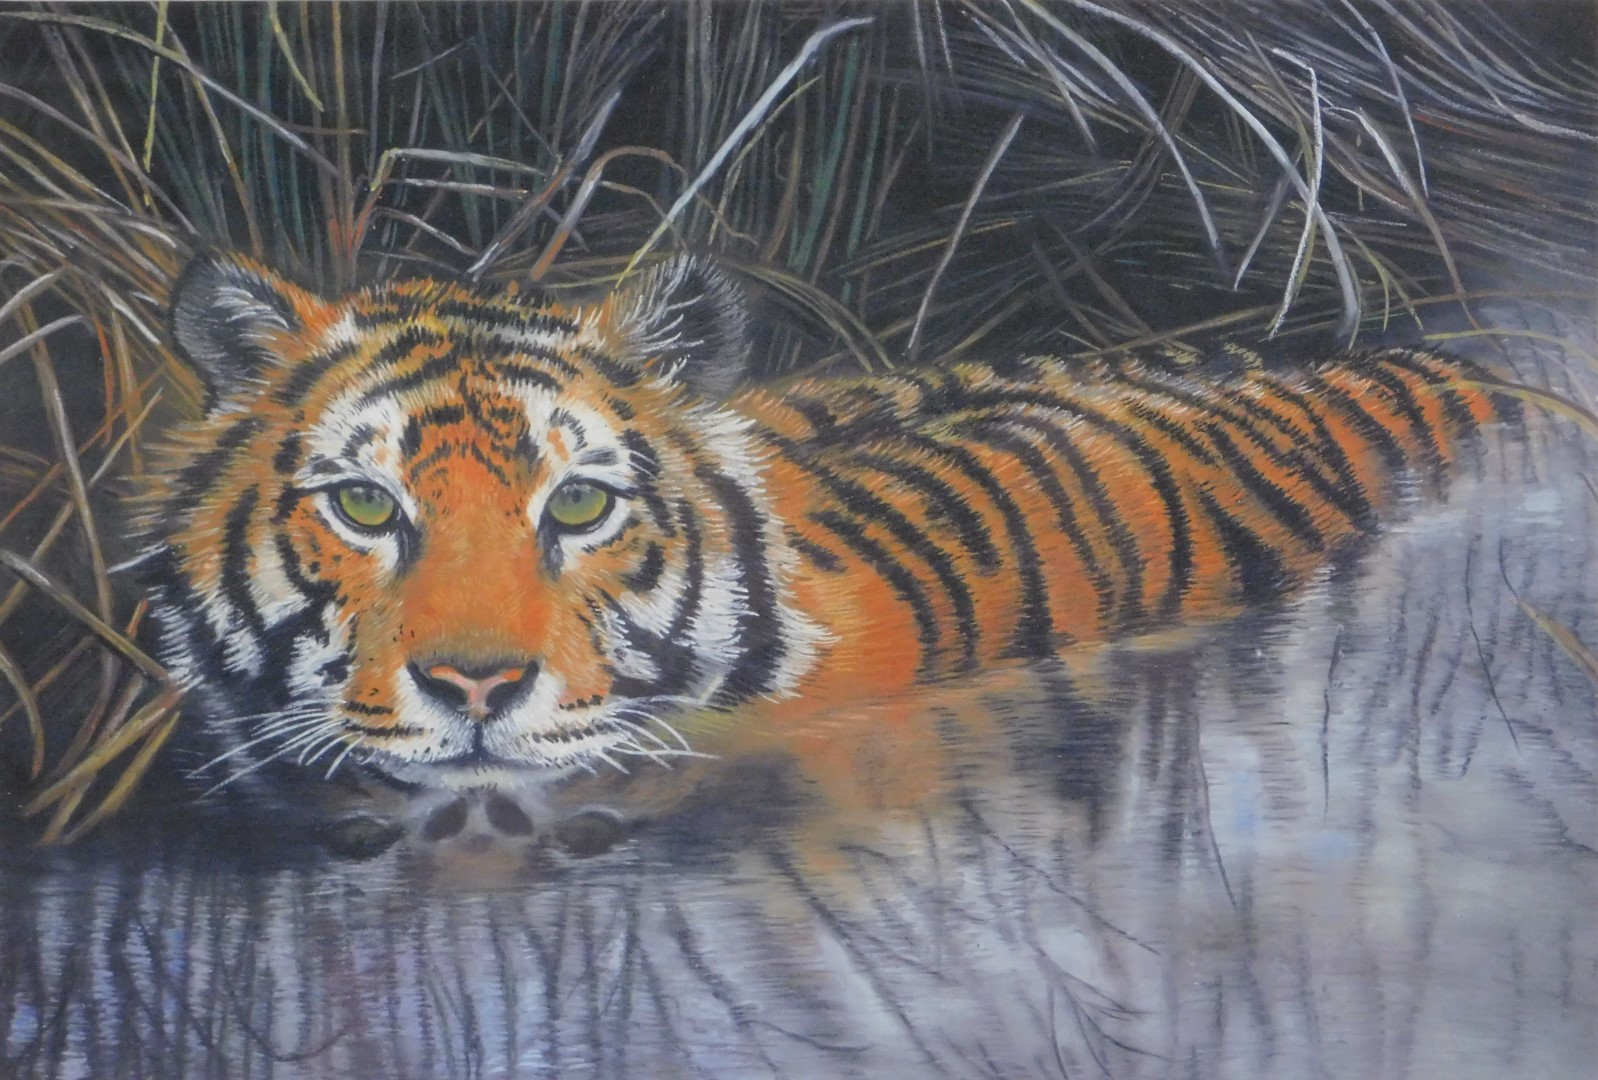 After Lindis Maria Colam (20thC). Siberian tiger in river, giclee print, 28cm x 39cm, framed and gla